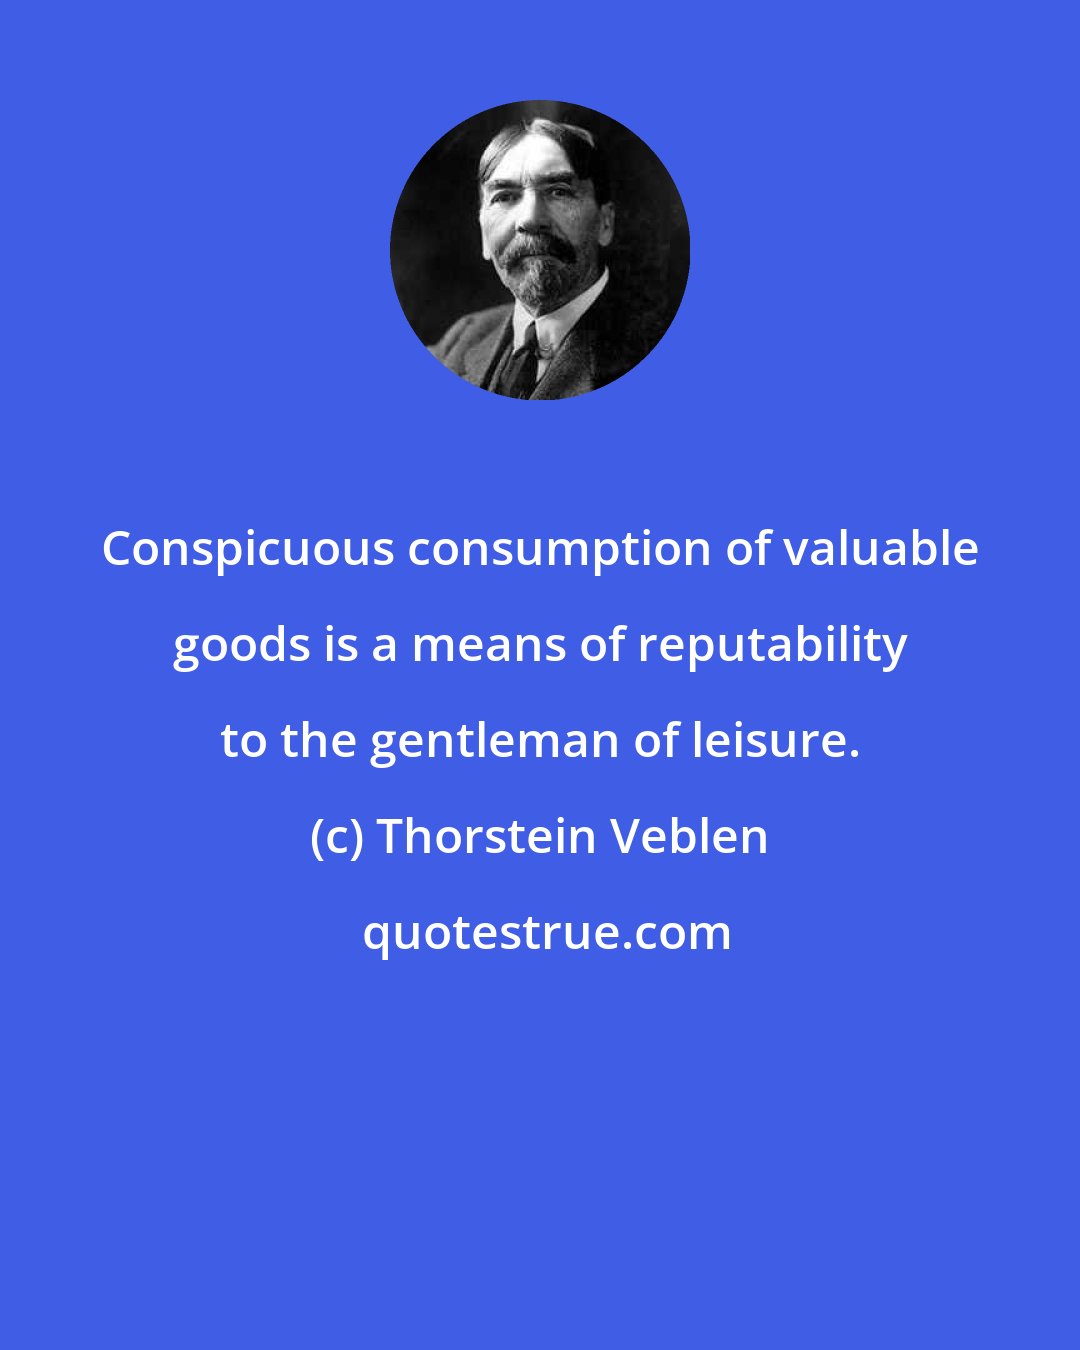 Thorstein Veblen: Conspicuous consumption of valuable goods is a means of reputability to the gentleman of leisure.